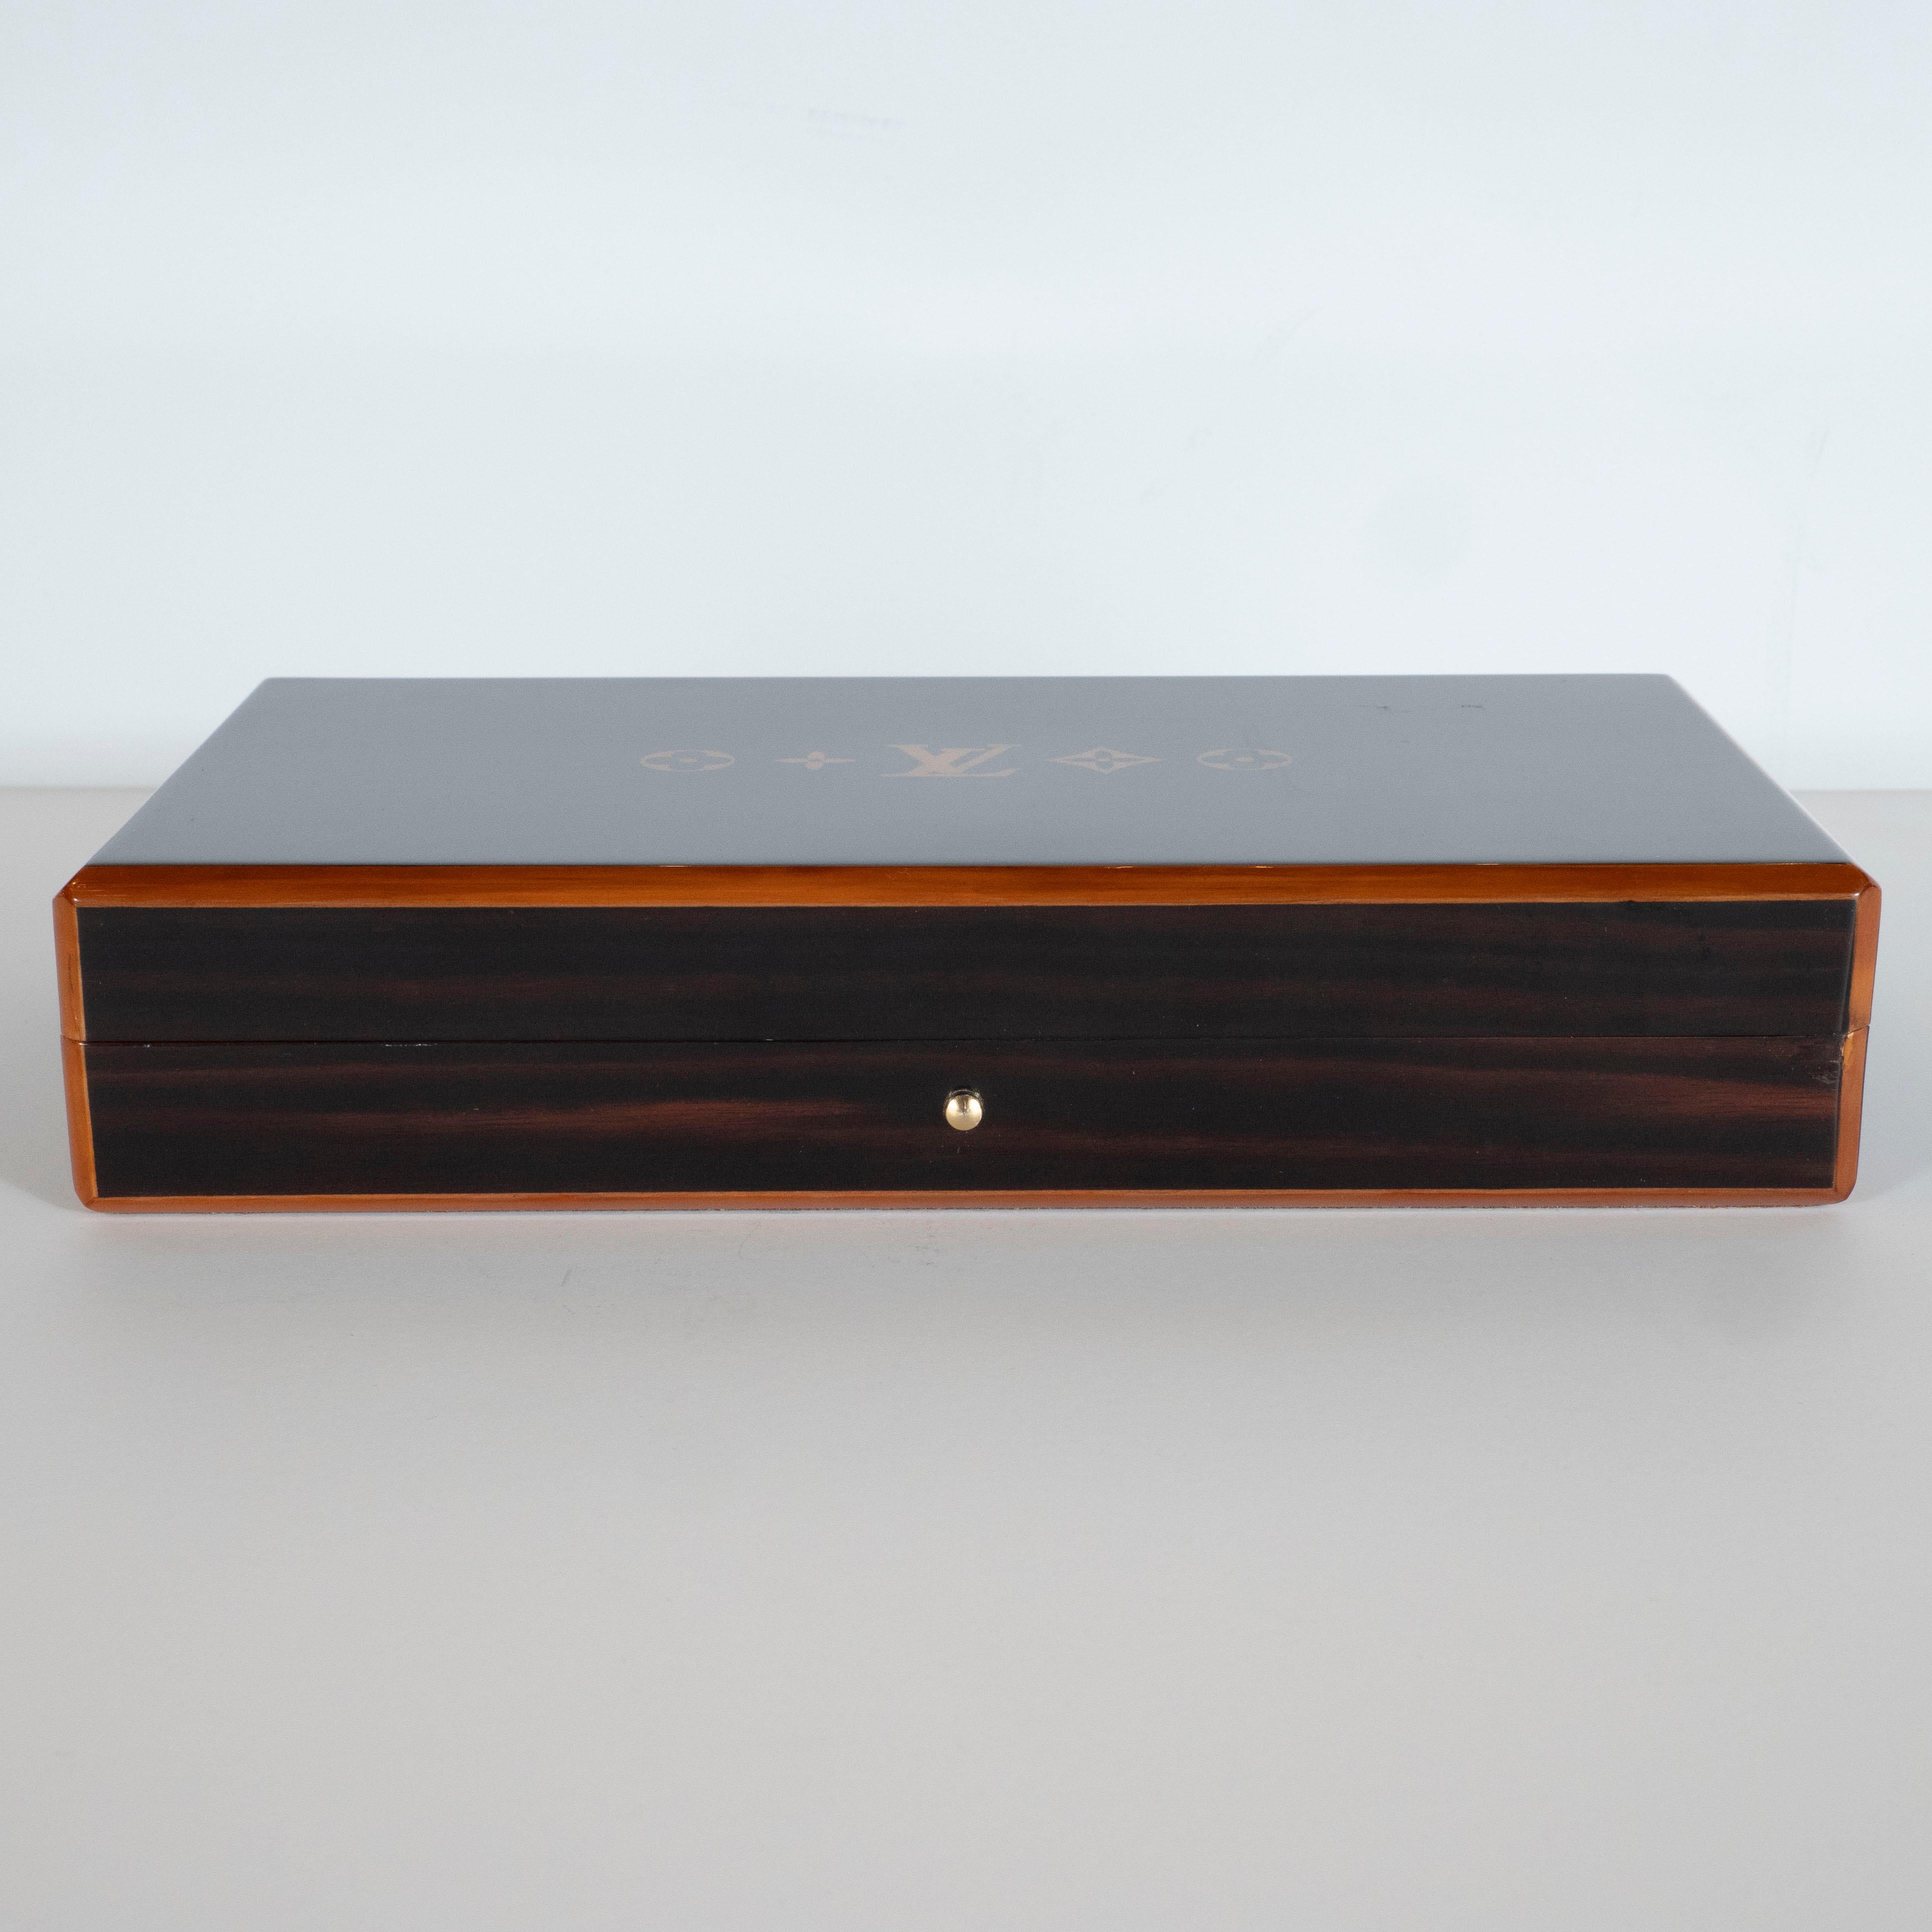 This elegant humidor was realized by Louis Vuitton- one of the world's premiere luxury brands since its inception in 1854. Executed in lacquered dark rosewood with blonde holly trim around the exterior, the humidor offers a volumetric rectangular